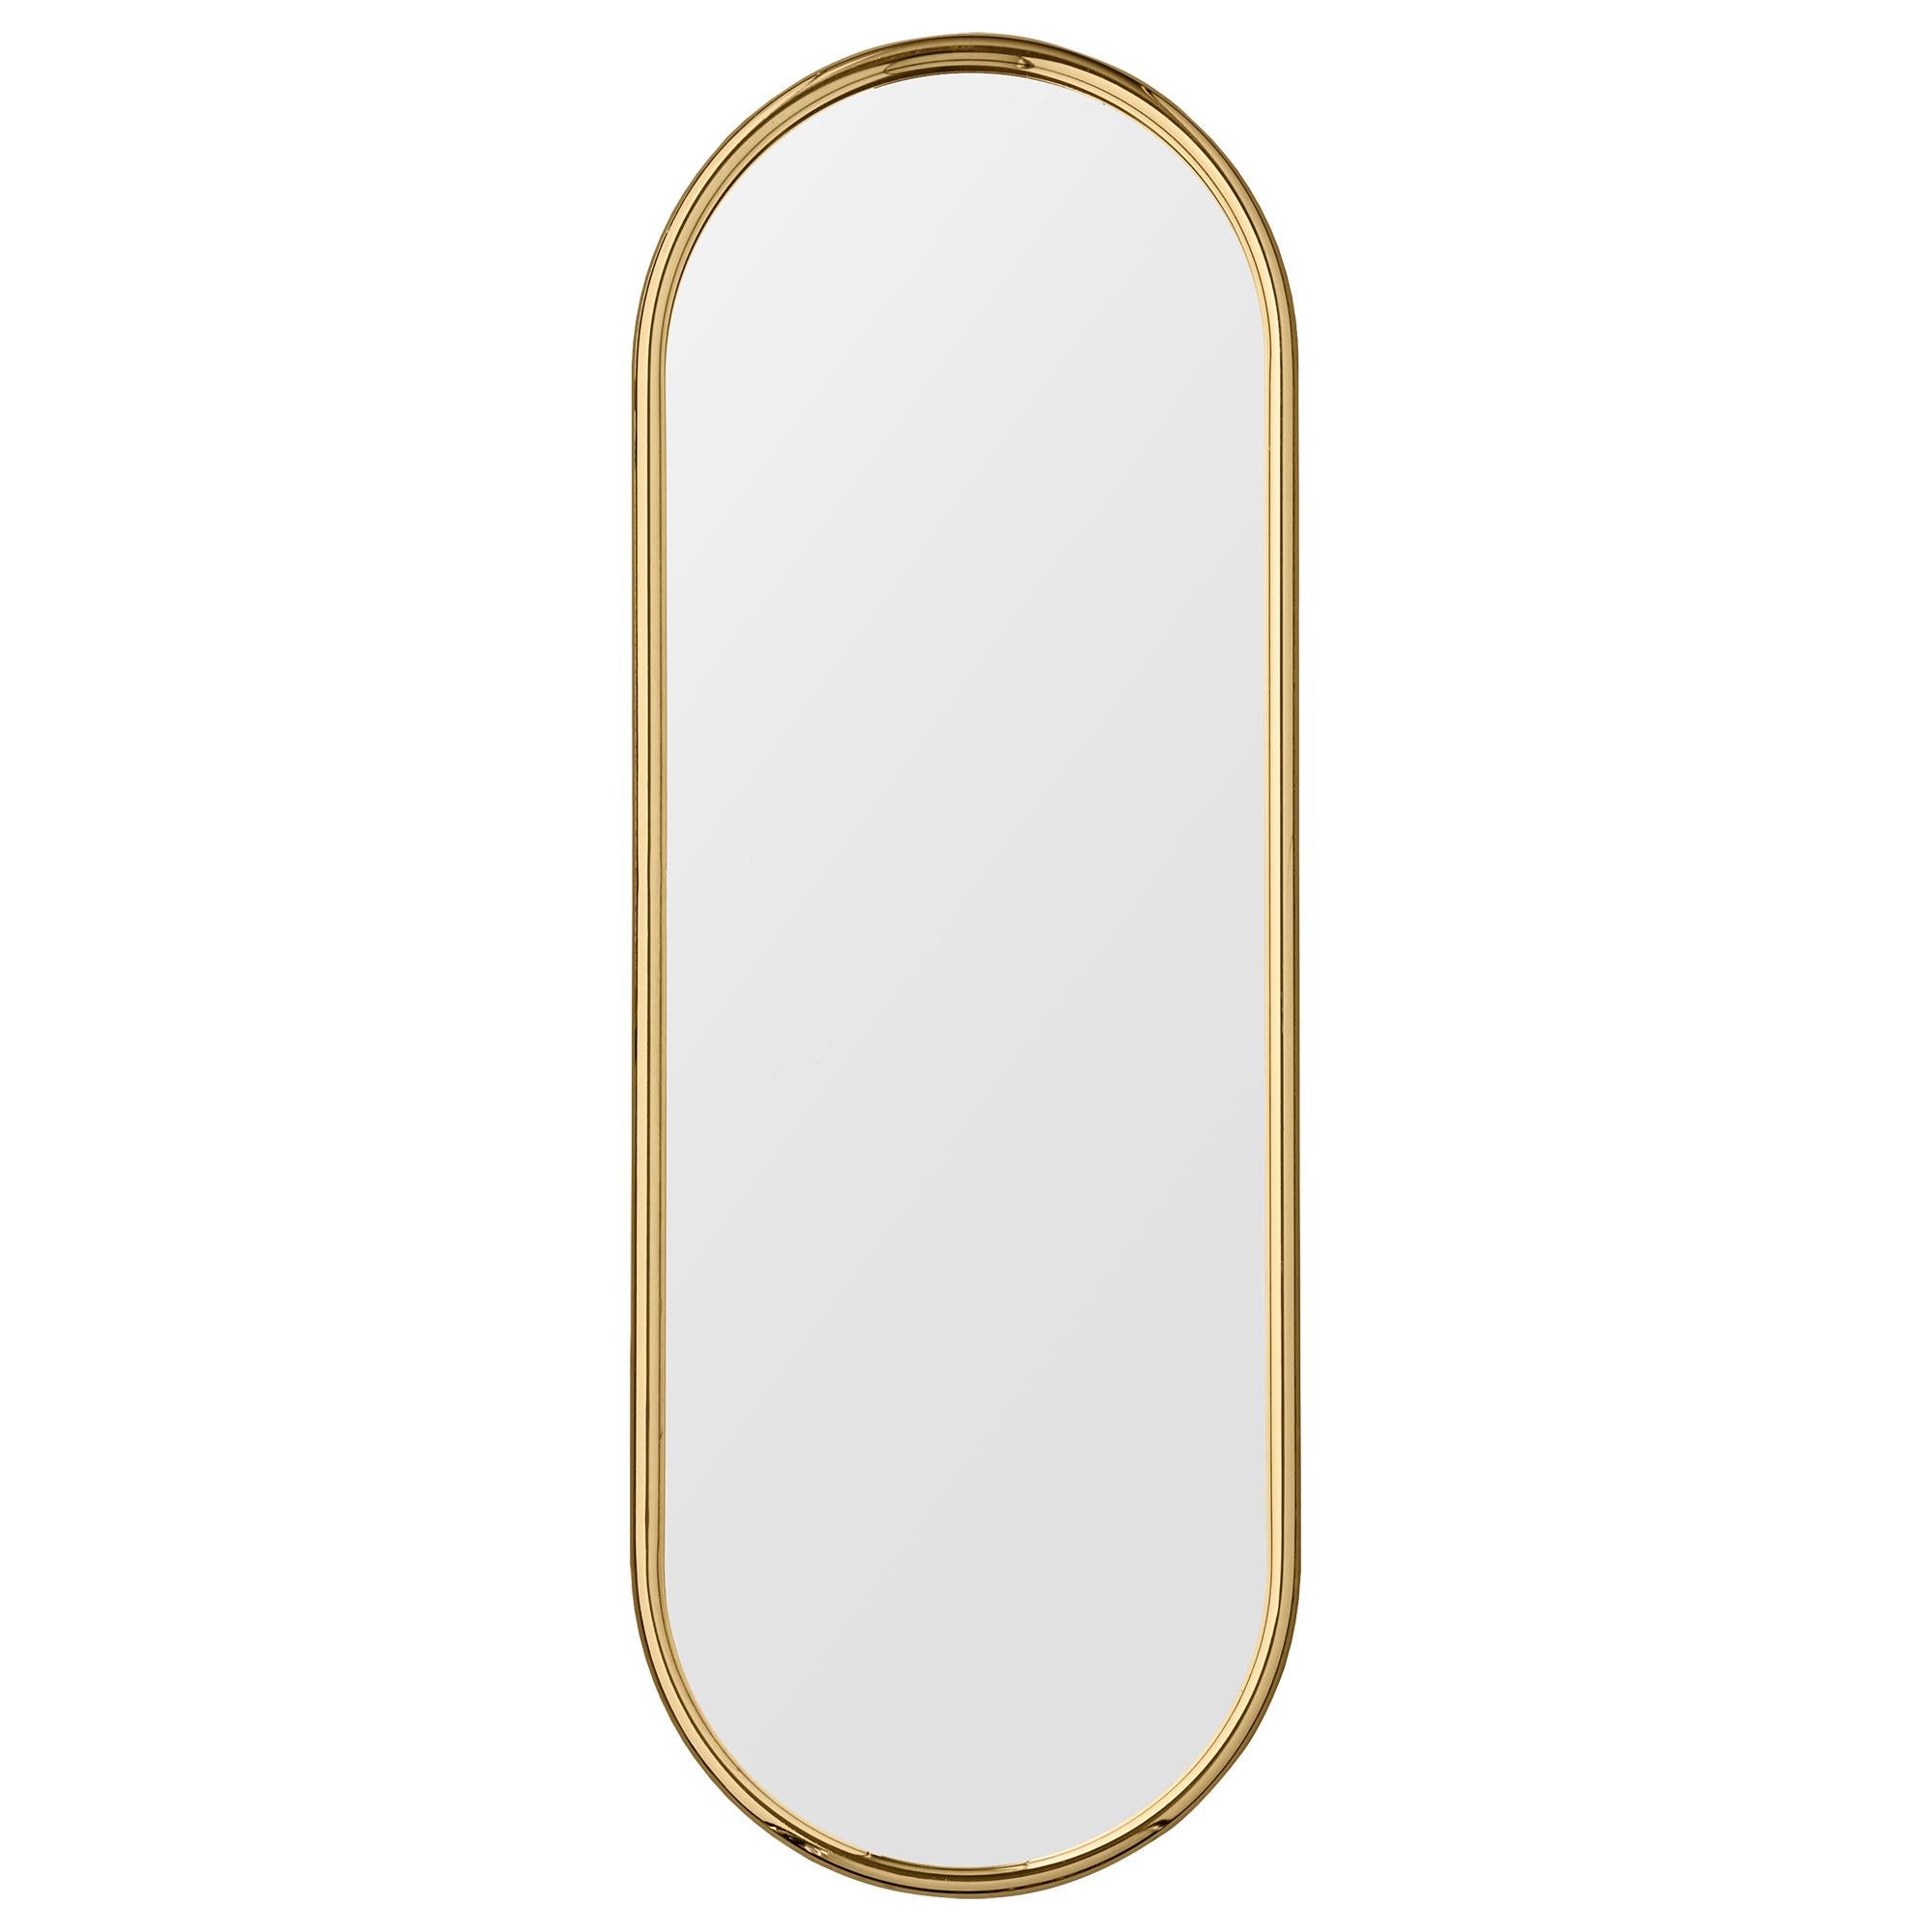 Angui golden oval large mirror by AYTM
Dimensions: 39 x 2 x 108 cm
Materials: Glass, copper, MDF

The Angui mirror with its simple pipe-styled frame is a beauty for any bathroom, hallway, or maybe bedroom. Use a single one or add several